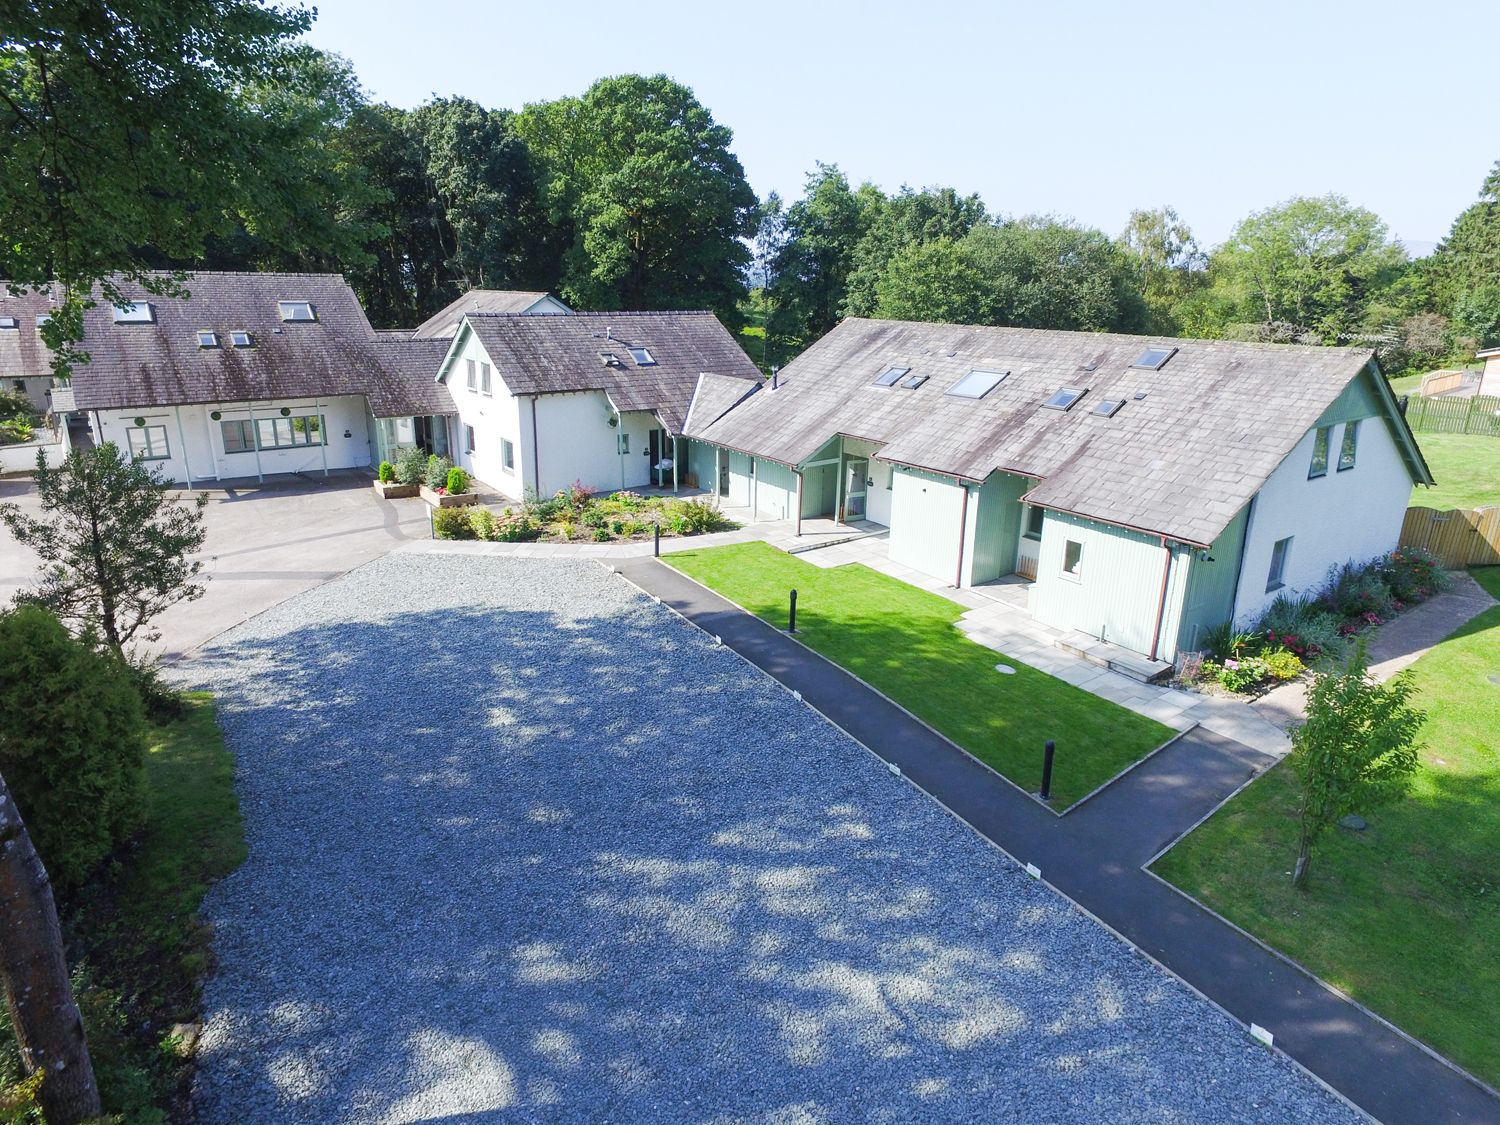 Yew - Woodland Cottages, Bowness-on-windermere